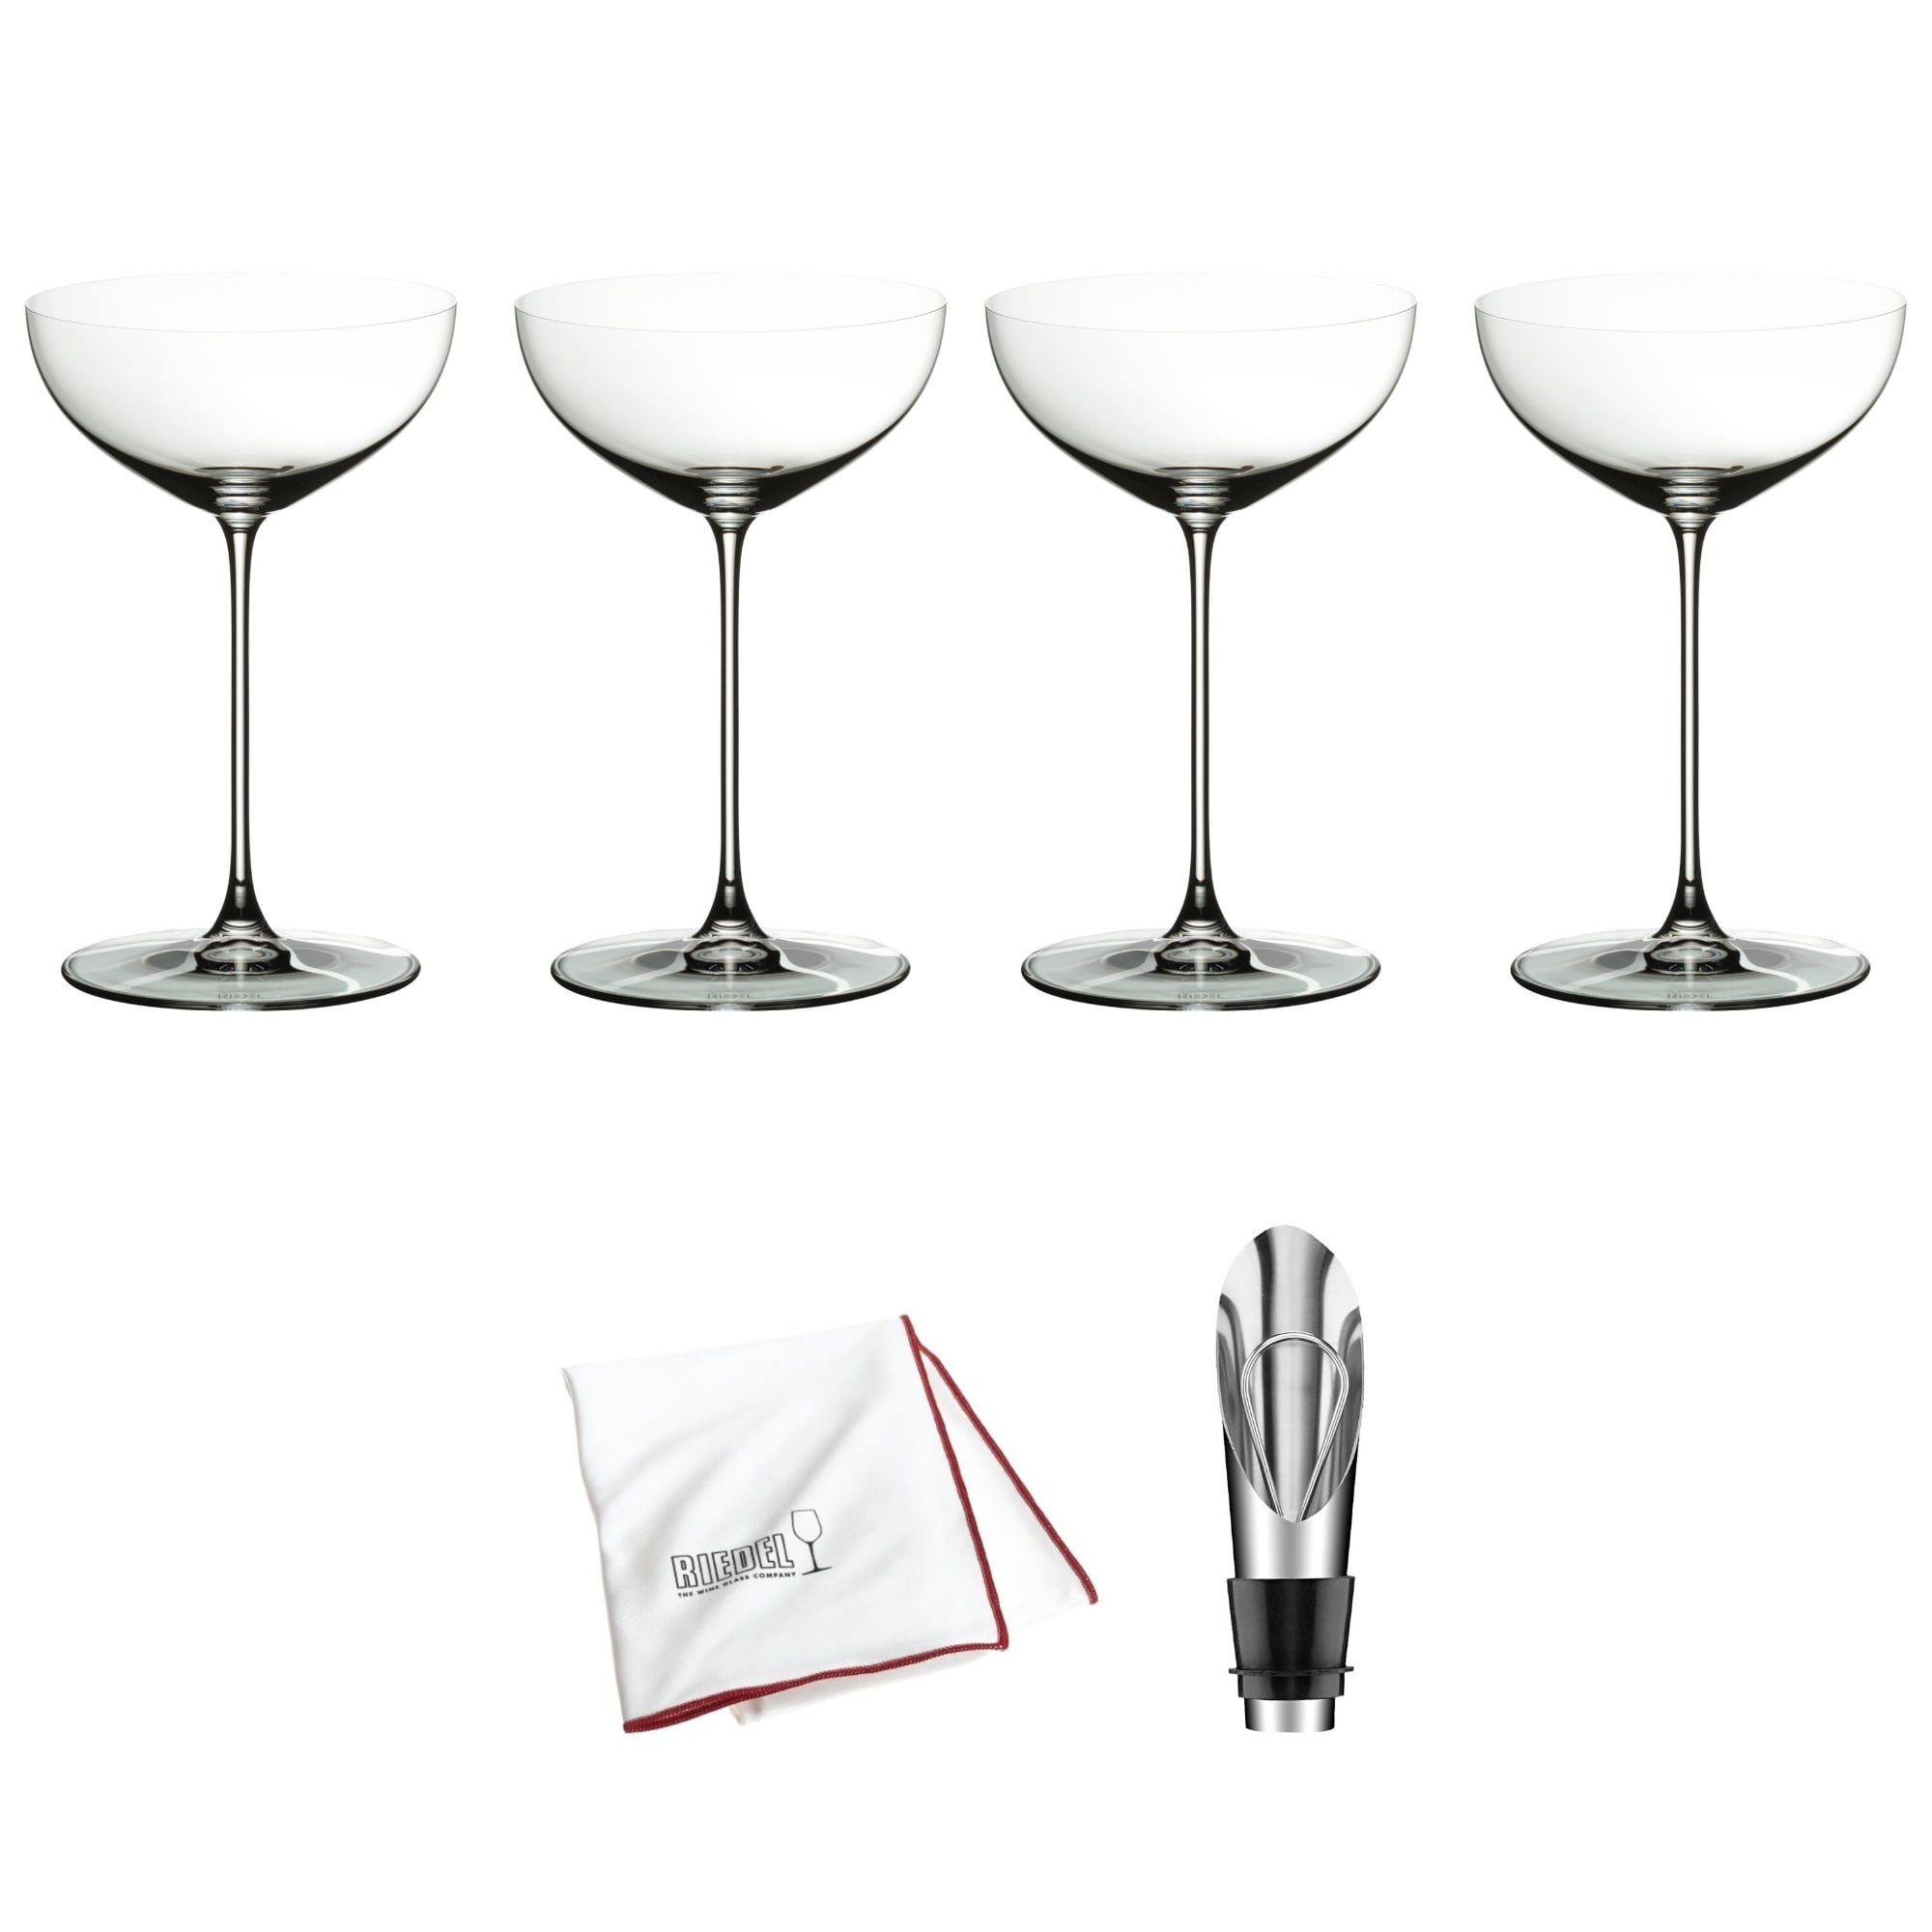 https://ak1.ostkcdn.com/images/products/is/images/direct/64aed1e5199b820fc0121e5aa24b0c8f4e66bf77/Riedel-Veritas-Moscato-Coupe-Martini-Glass-%284Pk%29-with-Pourer-and-Cloth.jpg